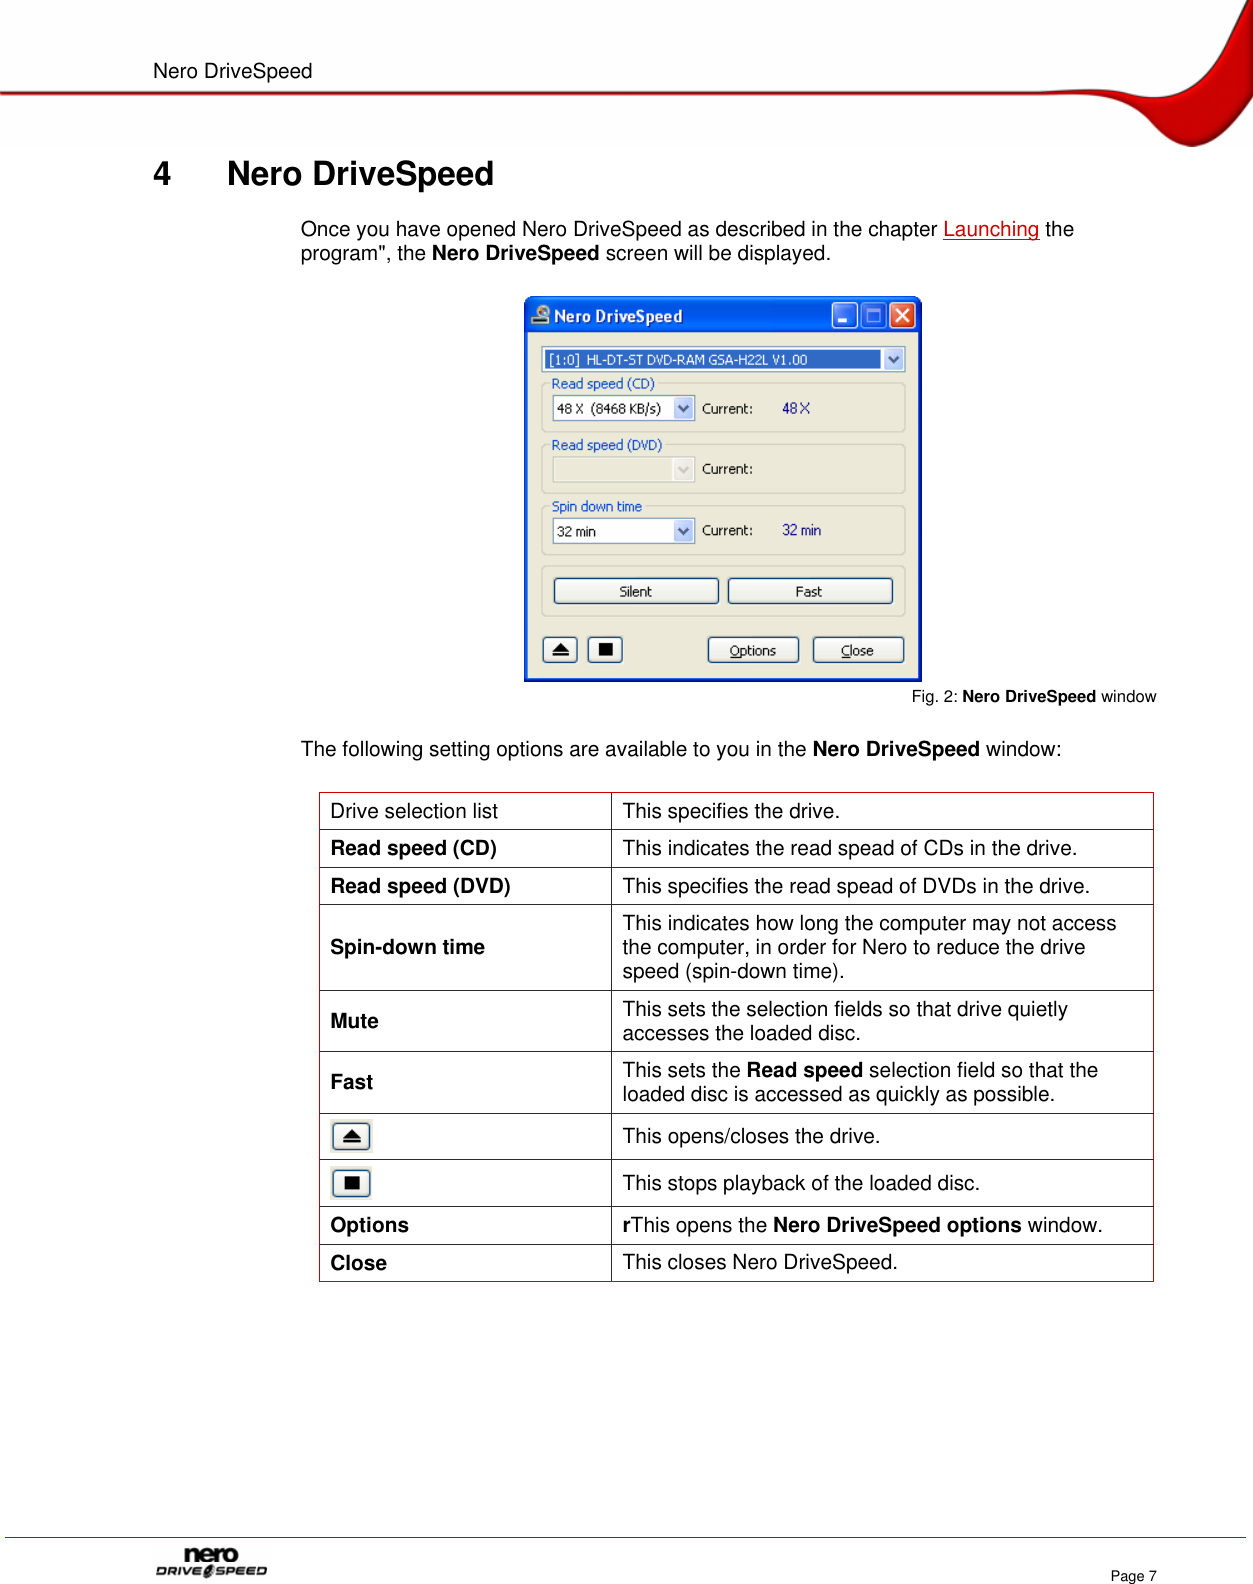 Page 7 of 12 - Nero - DRD_UML_ENG_INTRN_070223_V01__Nero_DriveSpeed_ENG Drive Speed User Manual Eng